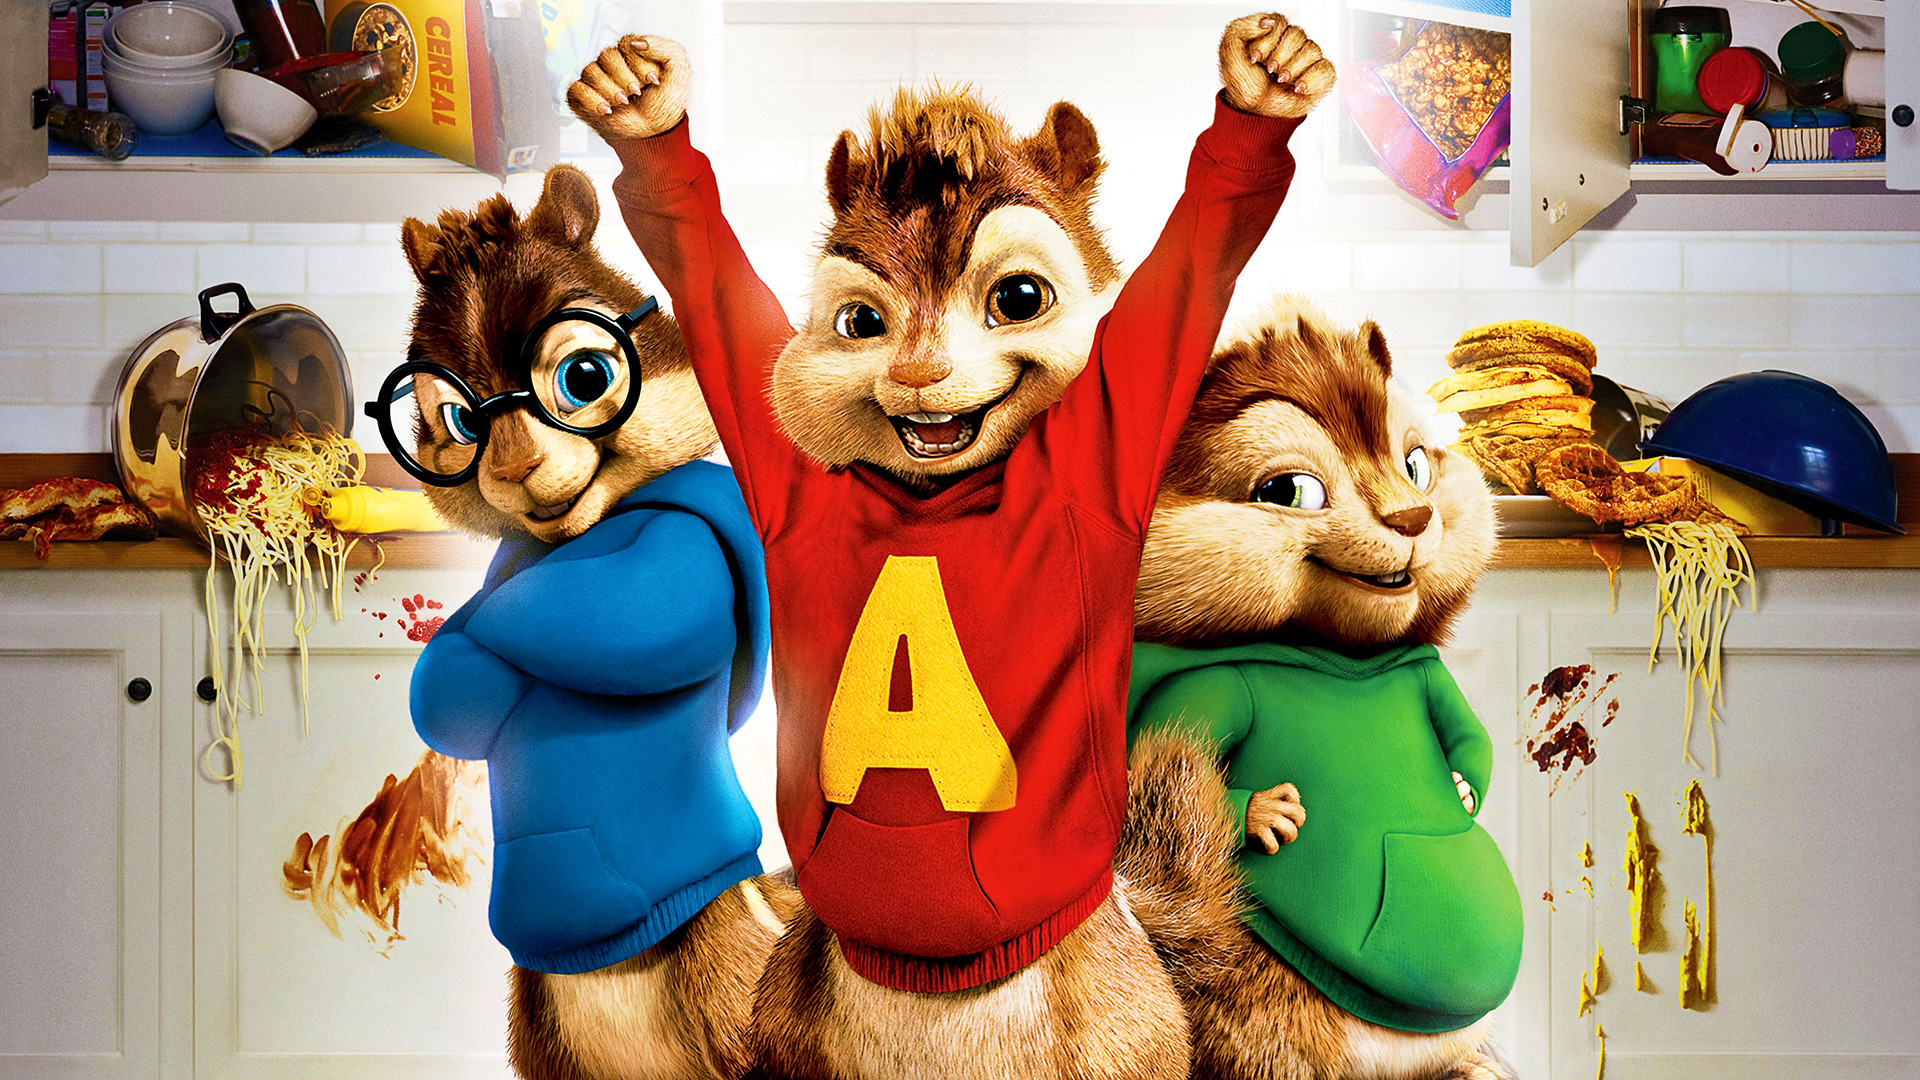 alvin and the chipmunks, movie Full HD